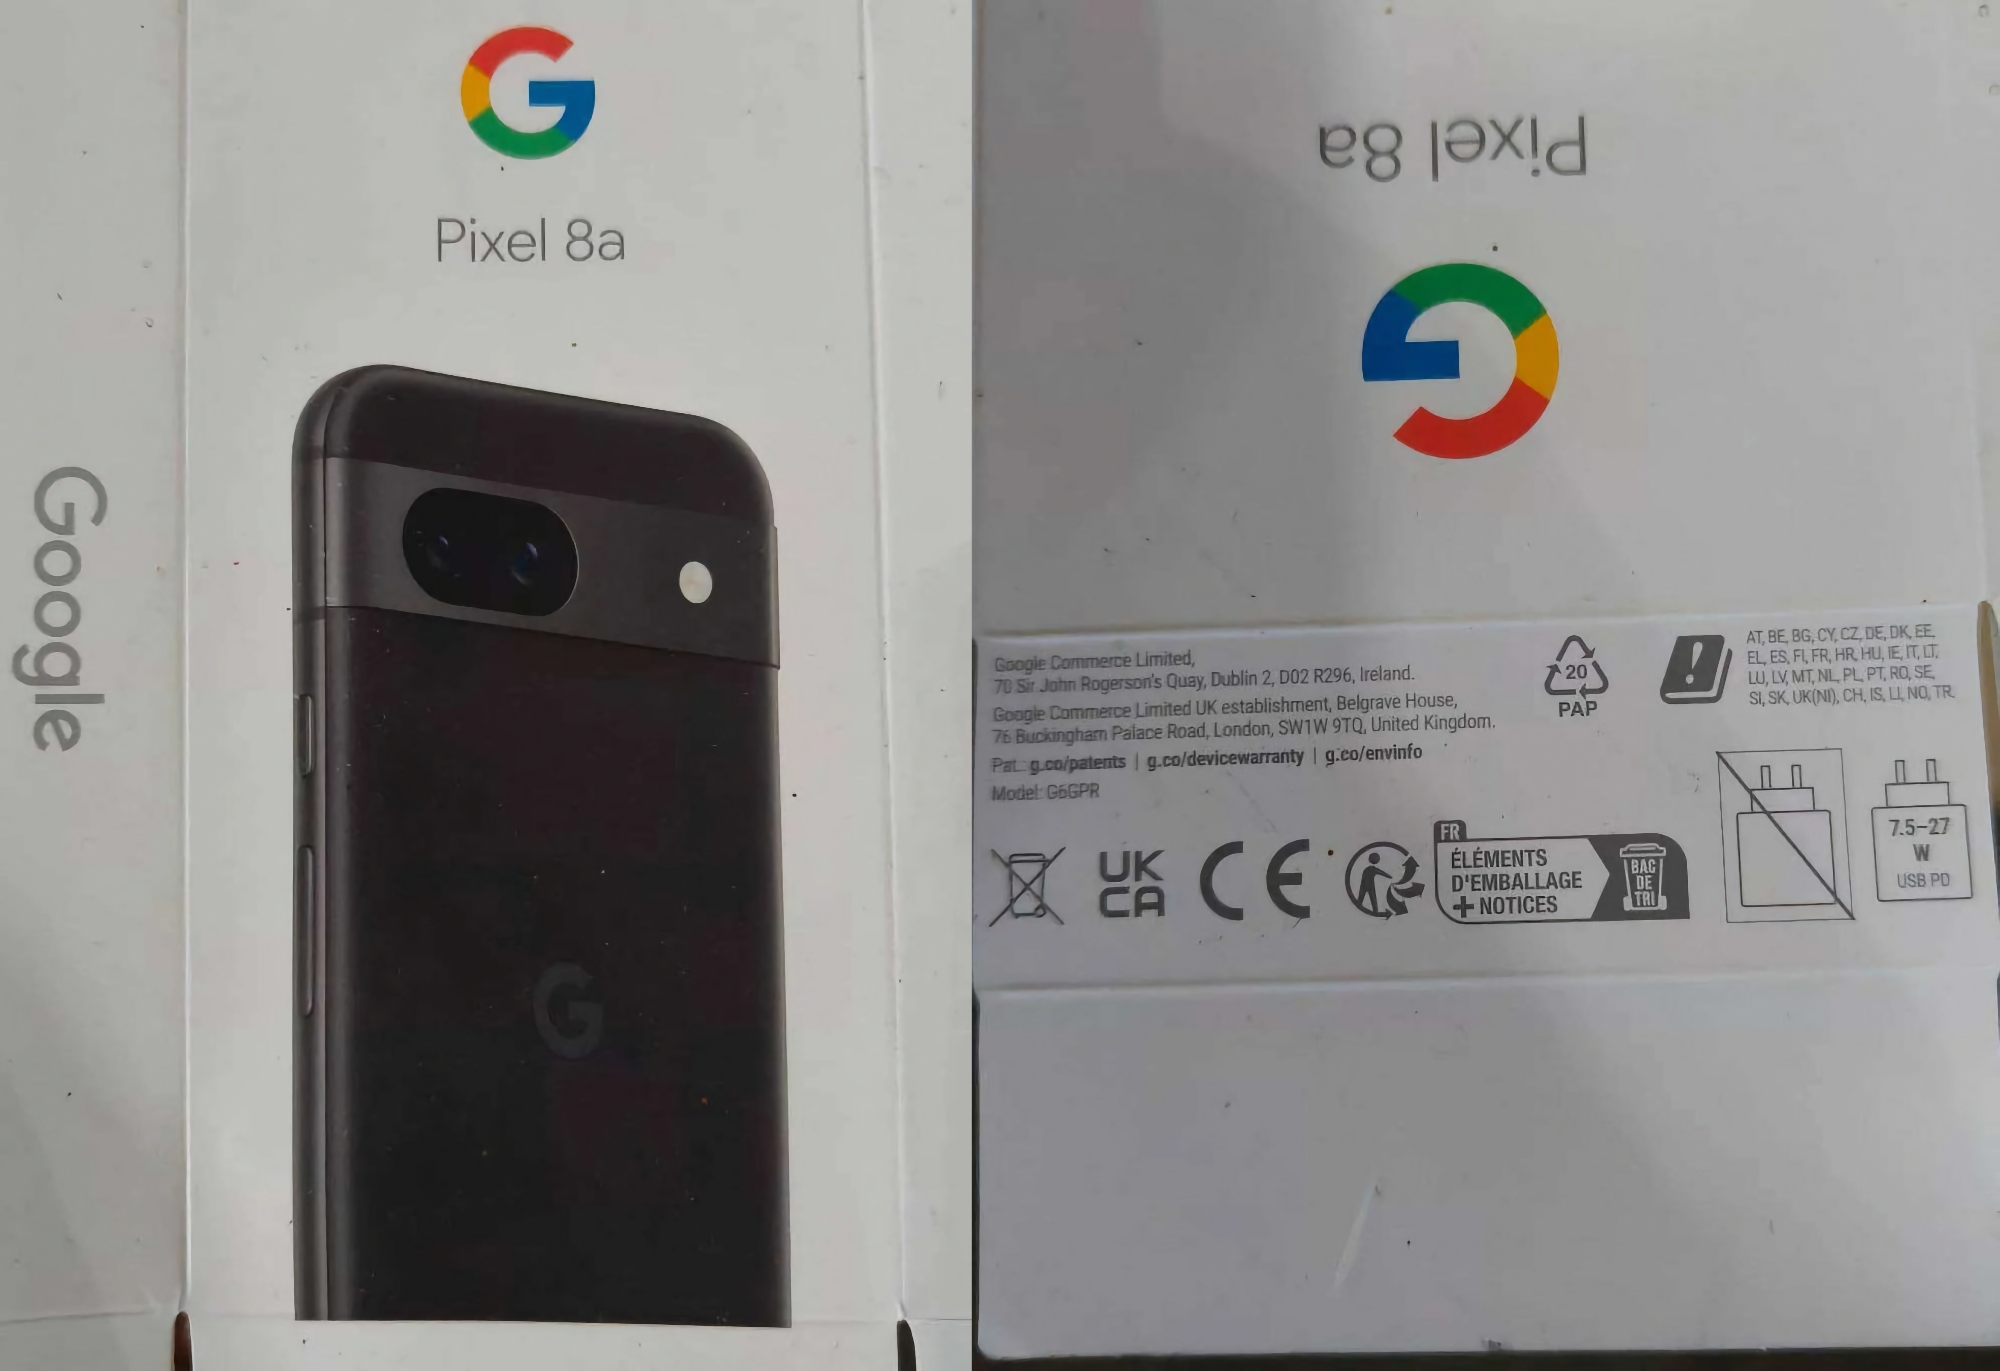 Black colour, dual camera and 27W charging support: new Google Pixel 8a leaks have surfaced online